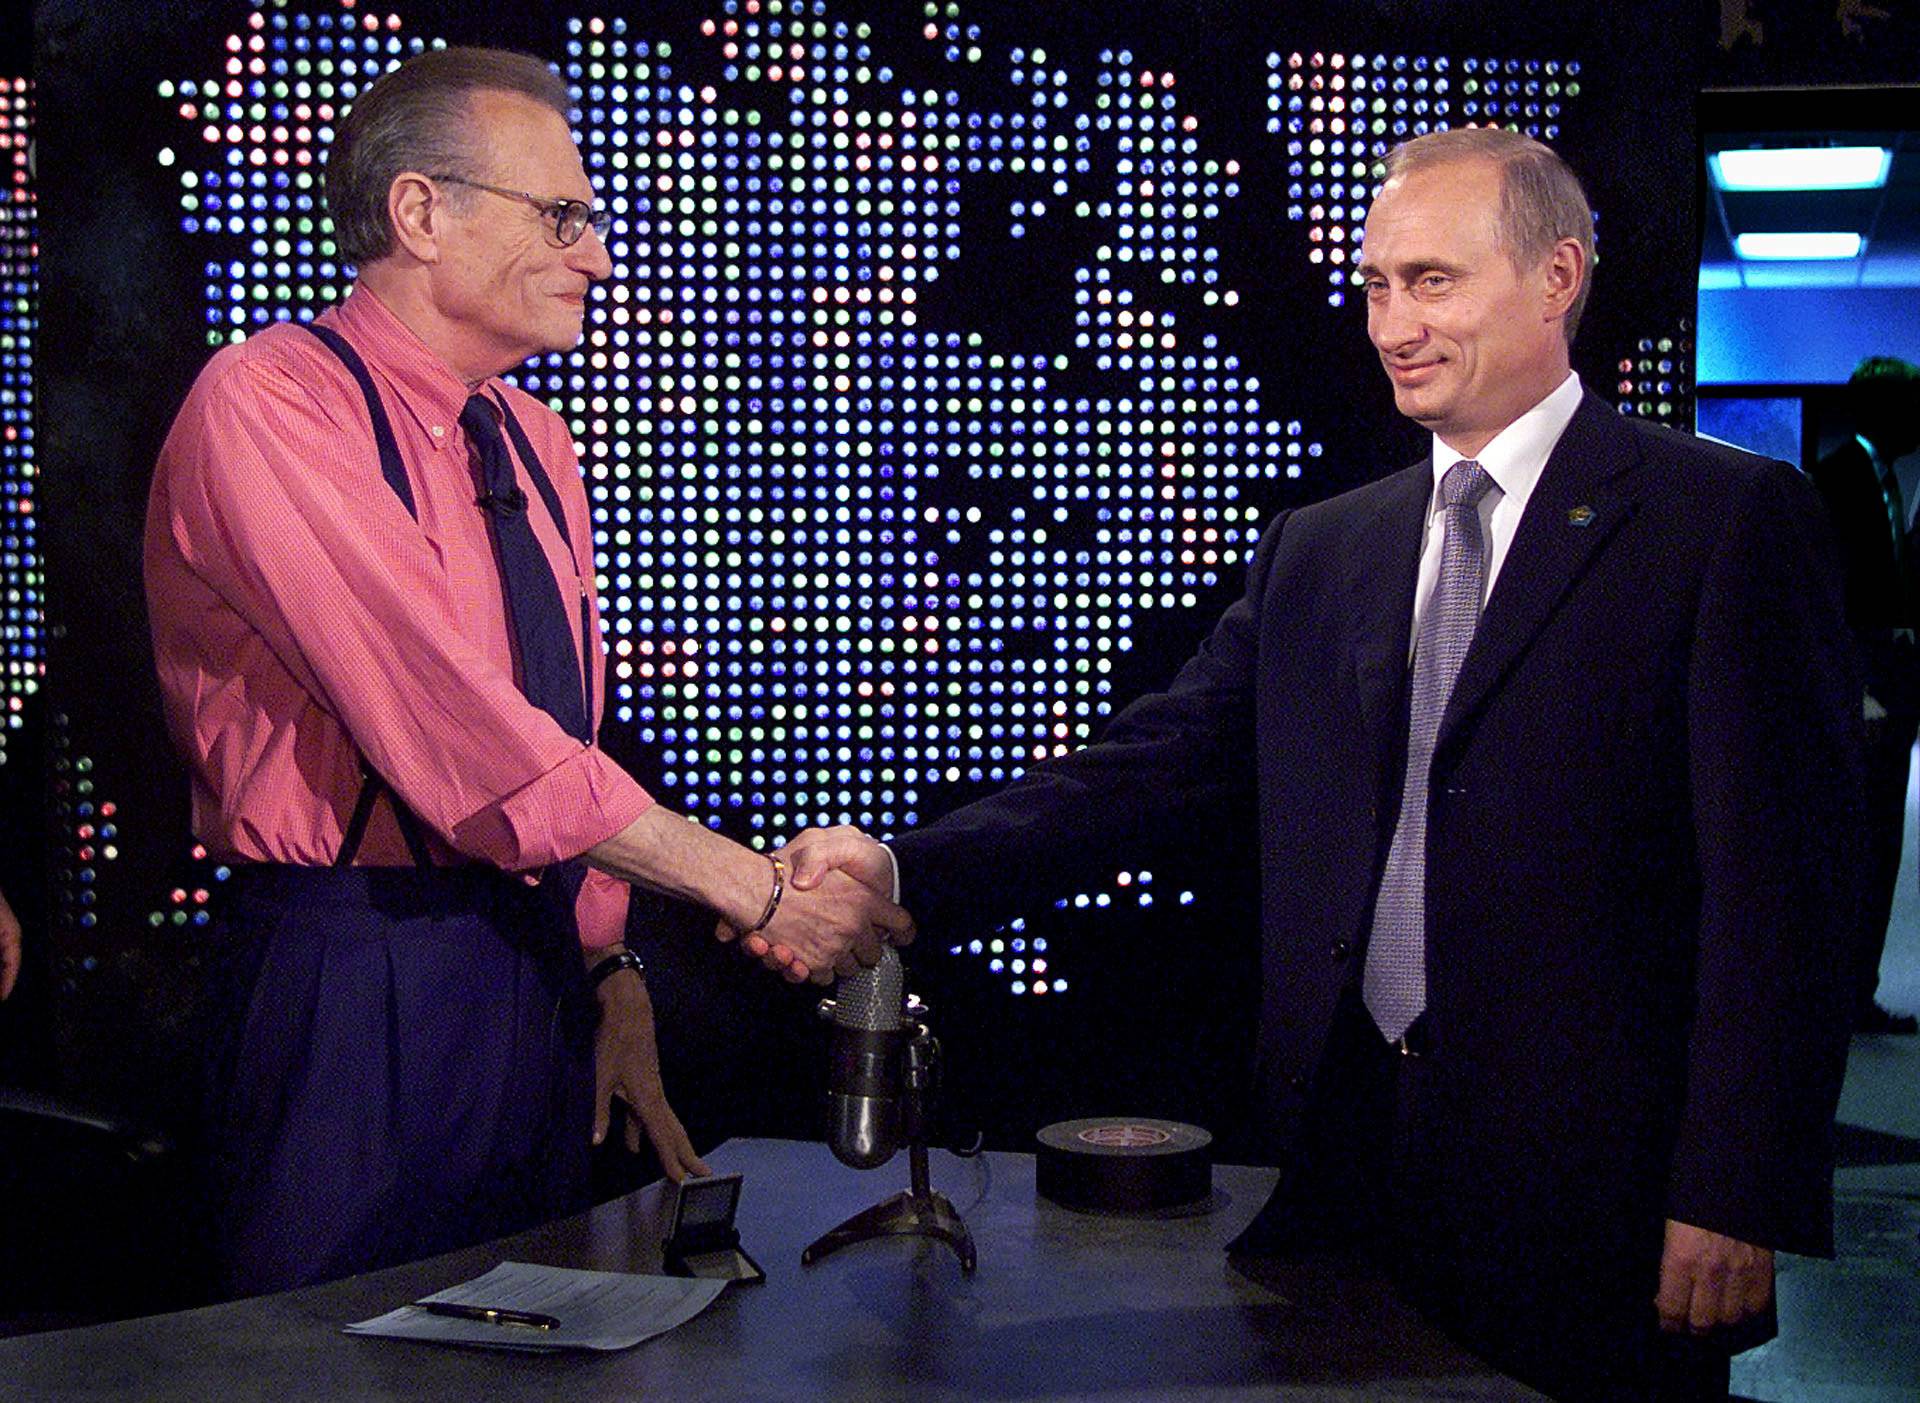 FILE PHOTO: Putin shakes hands with Larry King before taping of "The Larry King Show" in New York